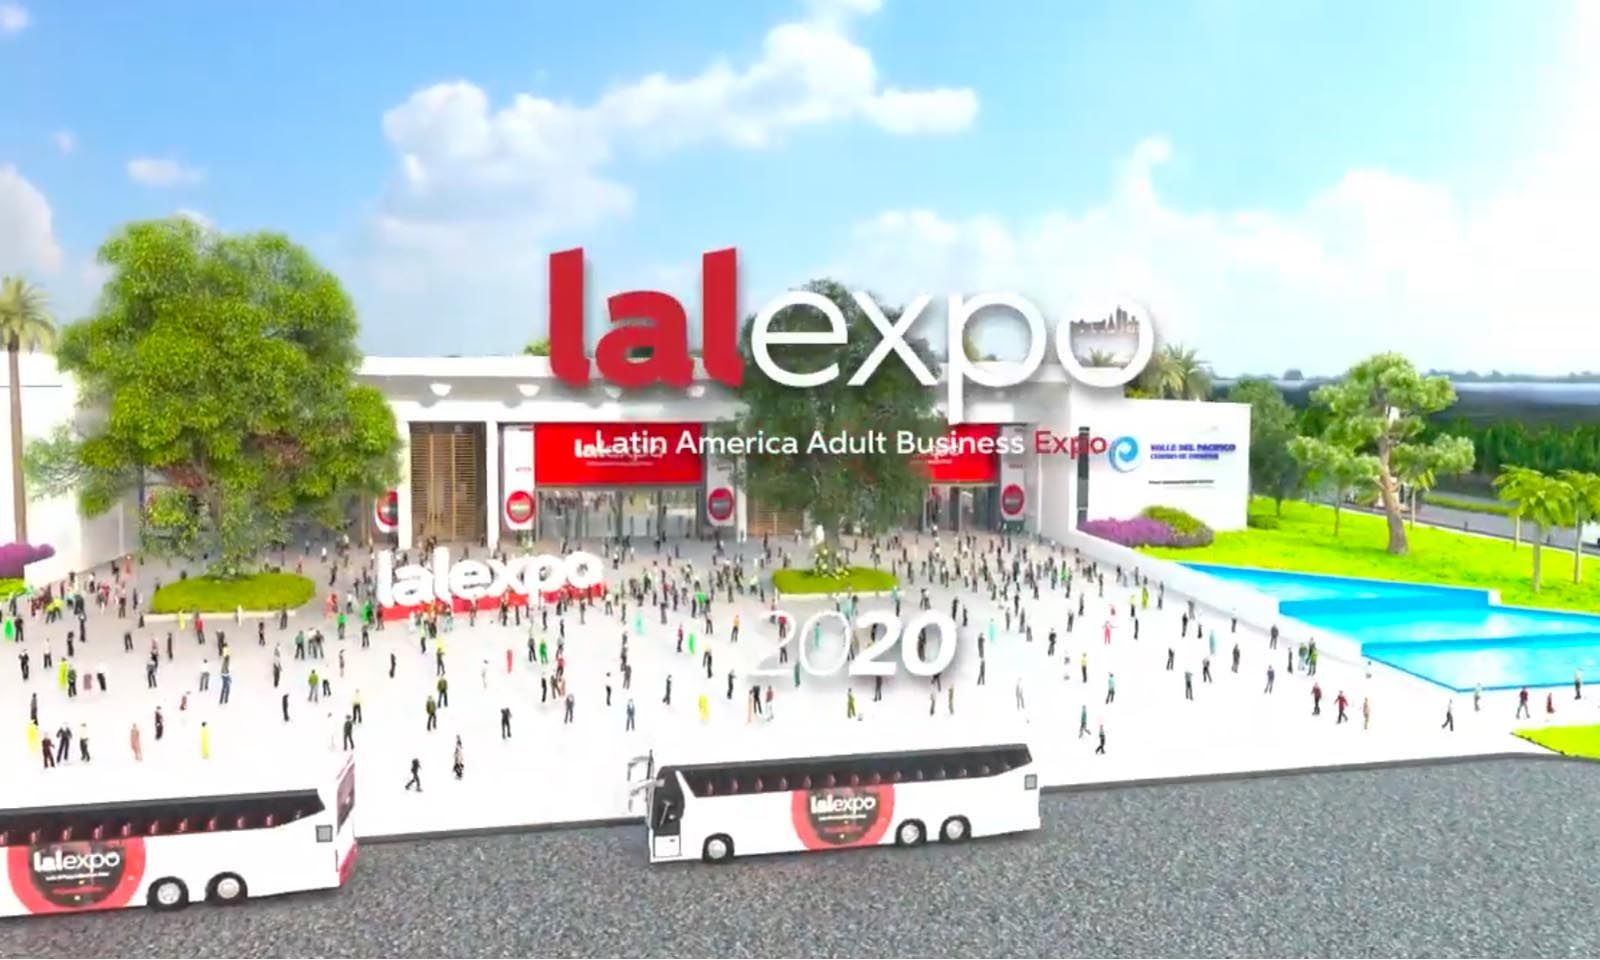 Lalexpo 2020 Names Official Hotel, Award Categories